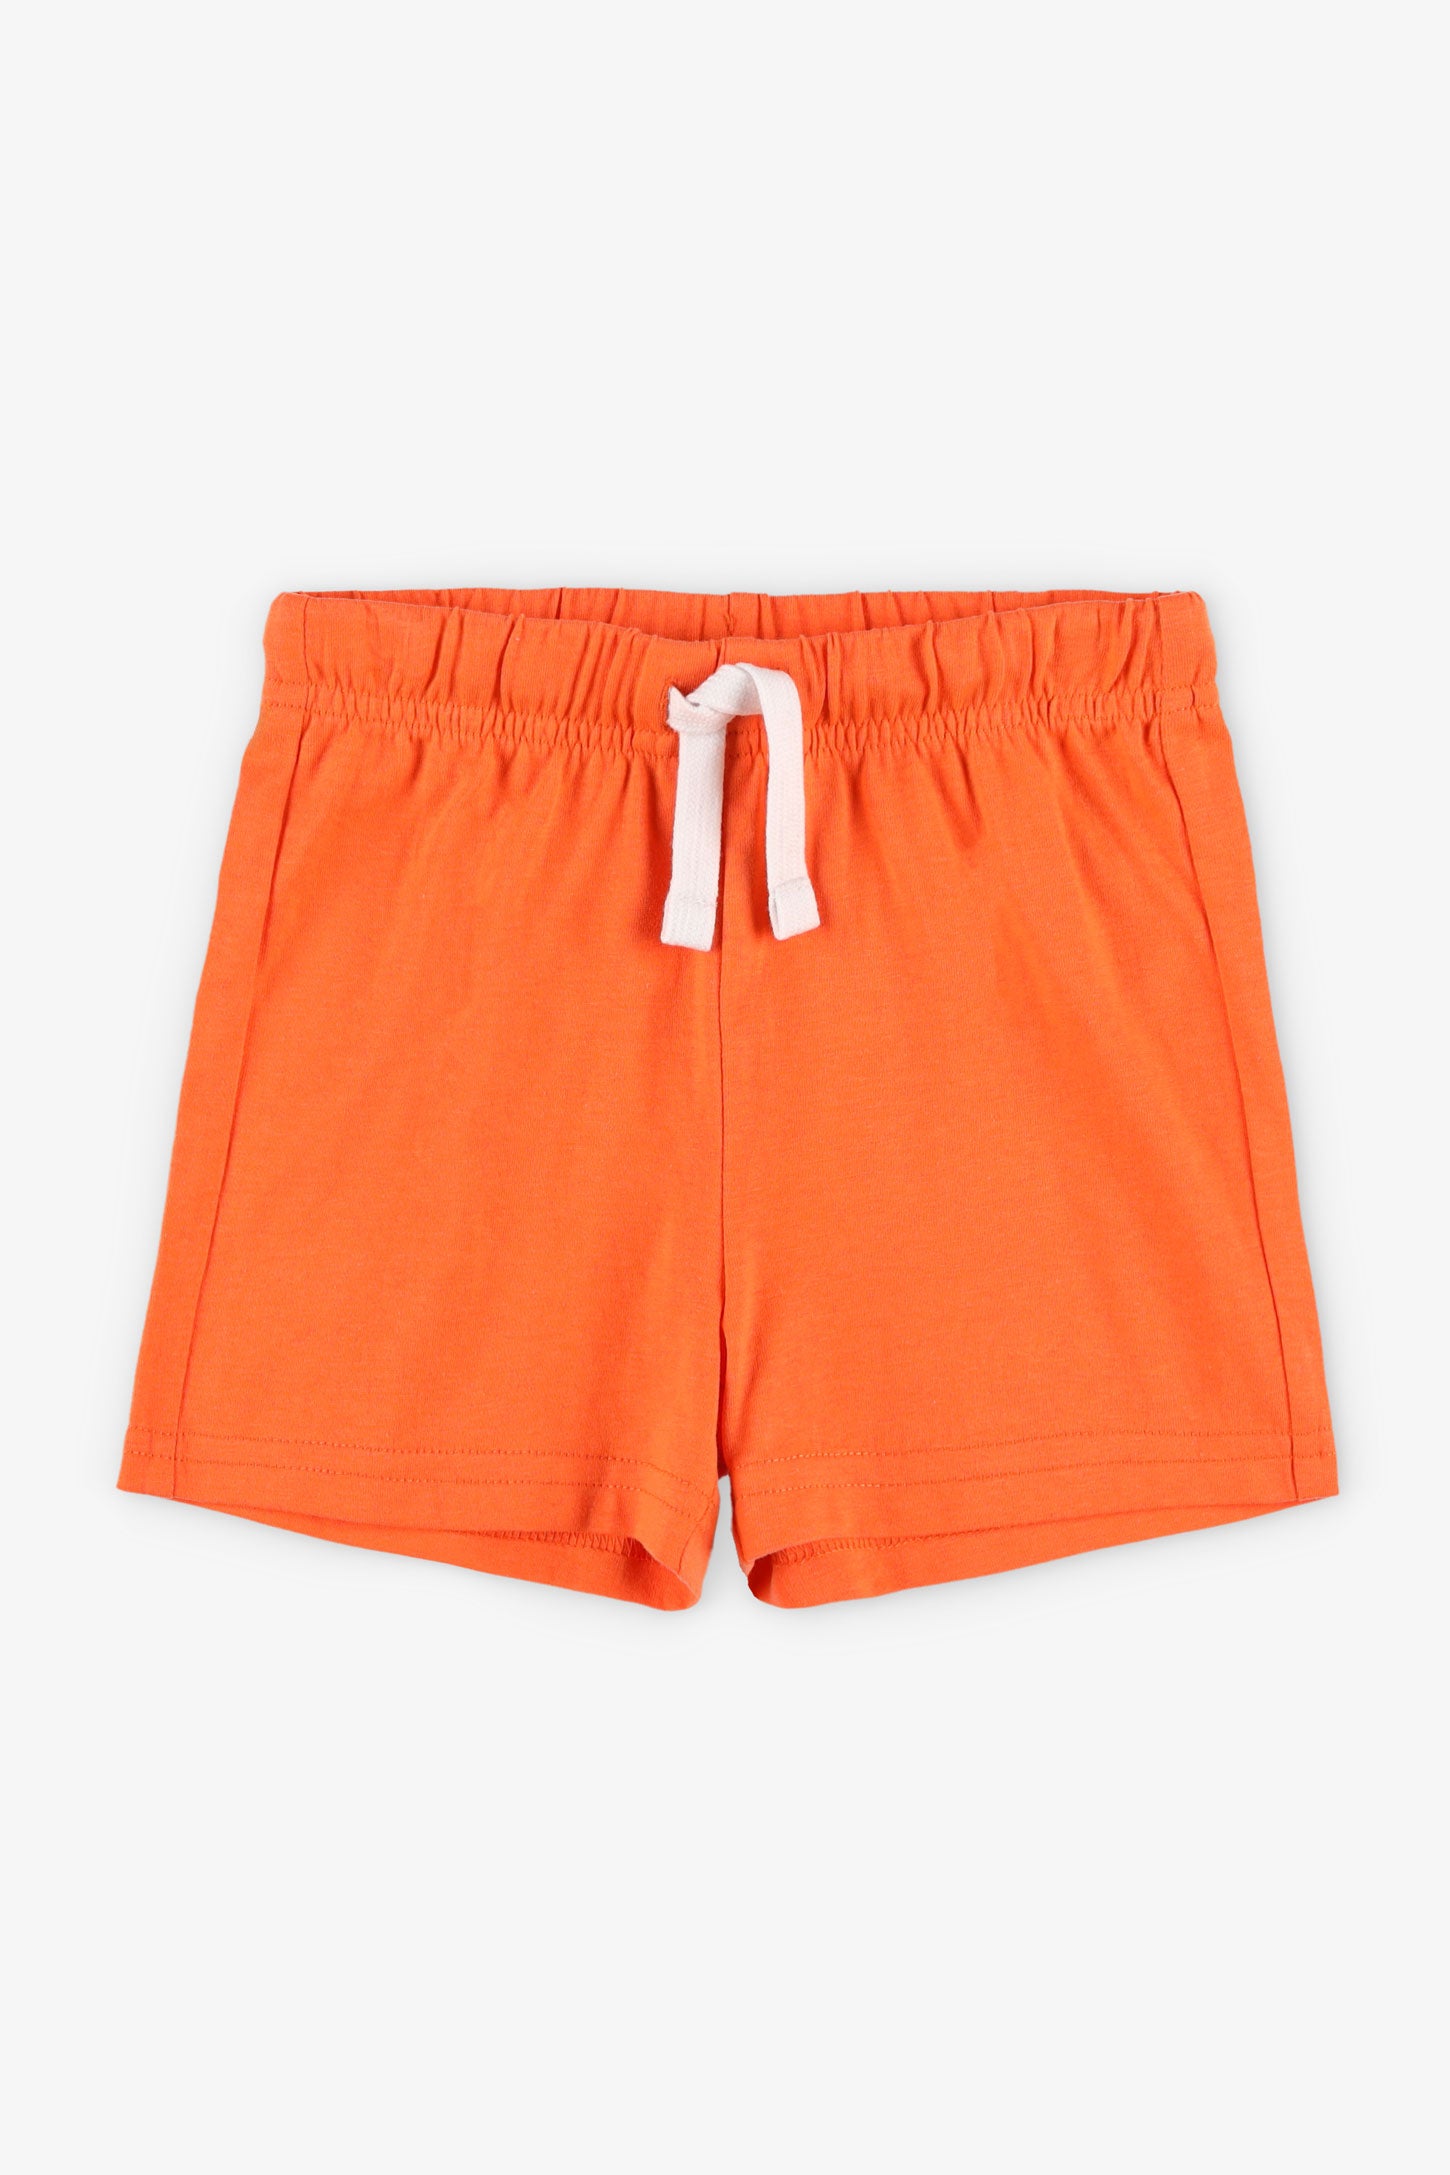 Pop prices, Pack of 2 cotton shorts, 2T-3T - Baby boy